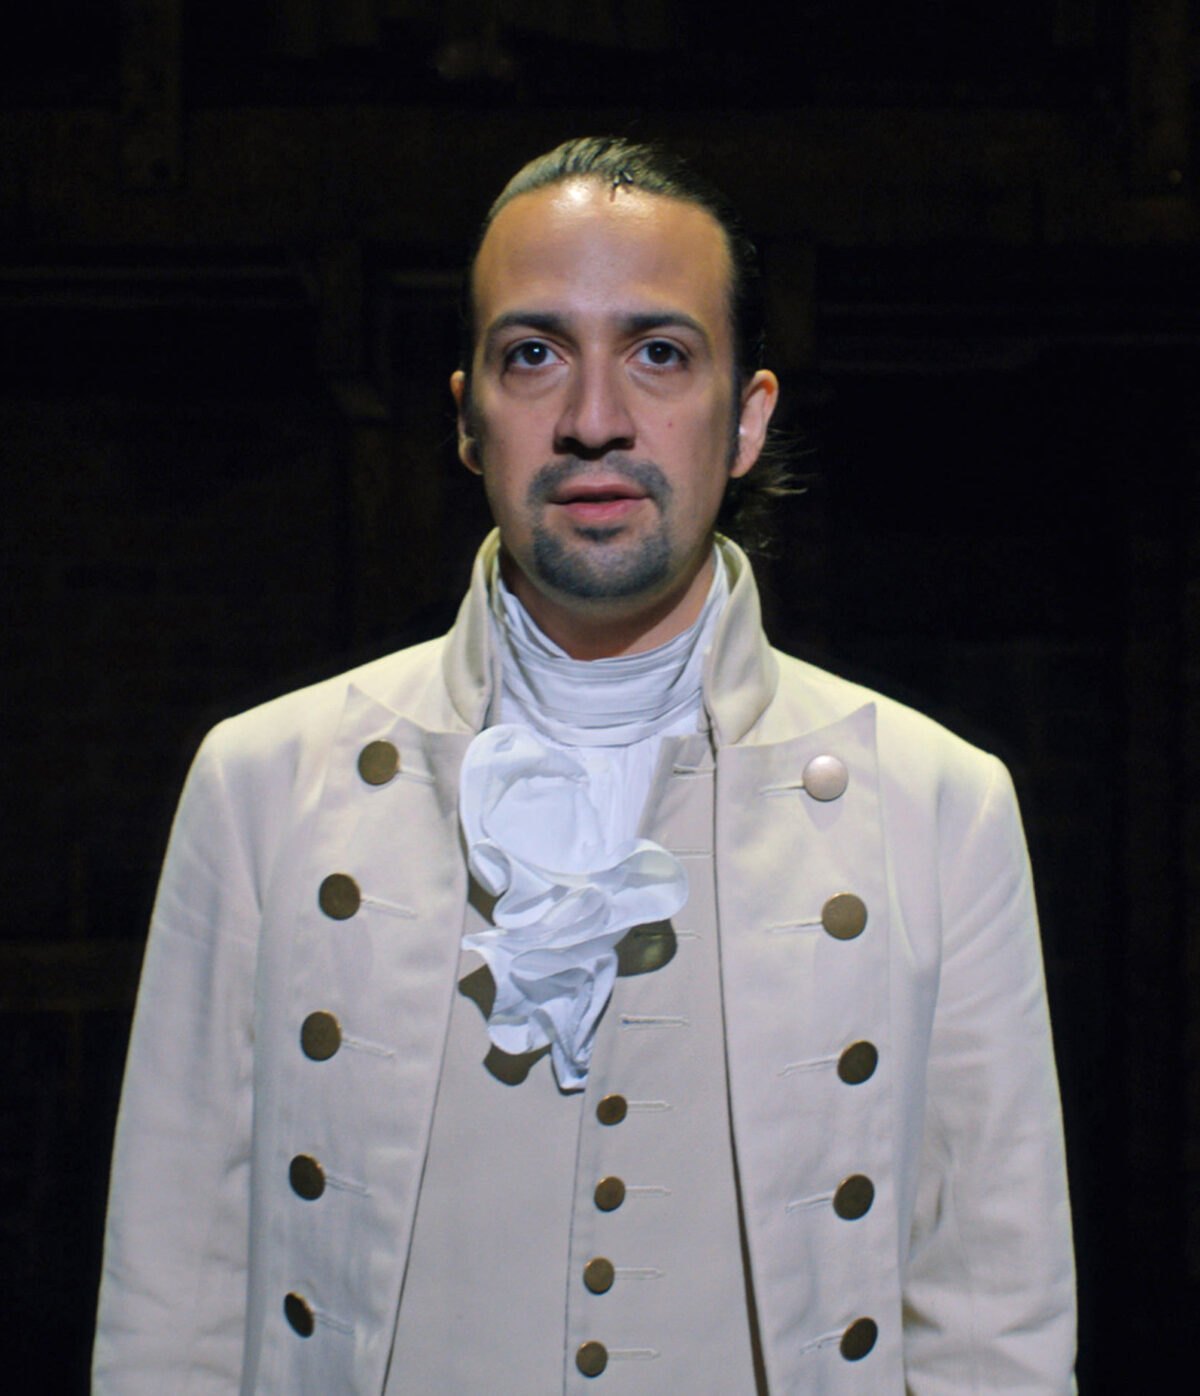 This is Lin-Manuel Miranda in his iconic role, familiar outfit, as Alexander Hamilton from his musical Hamilton.